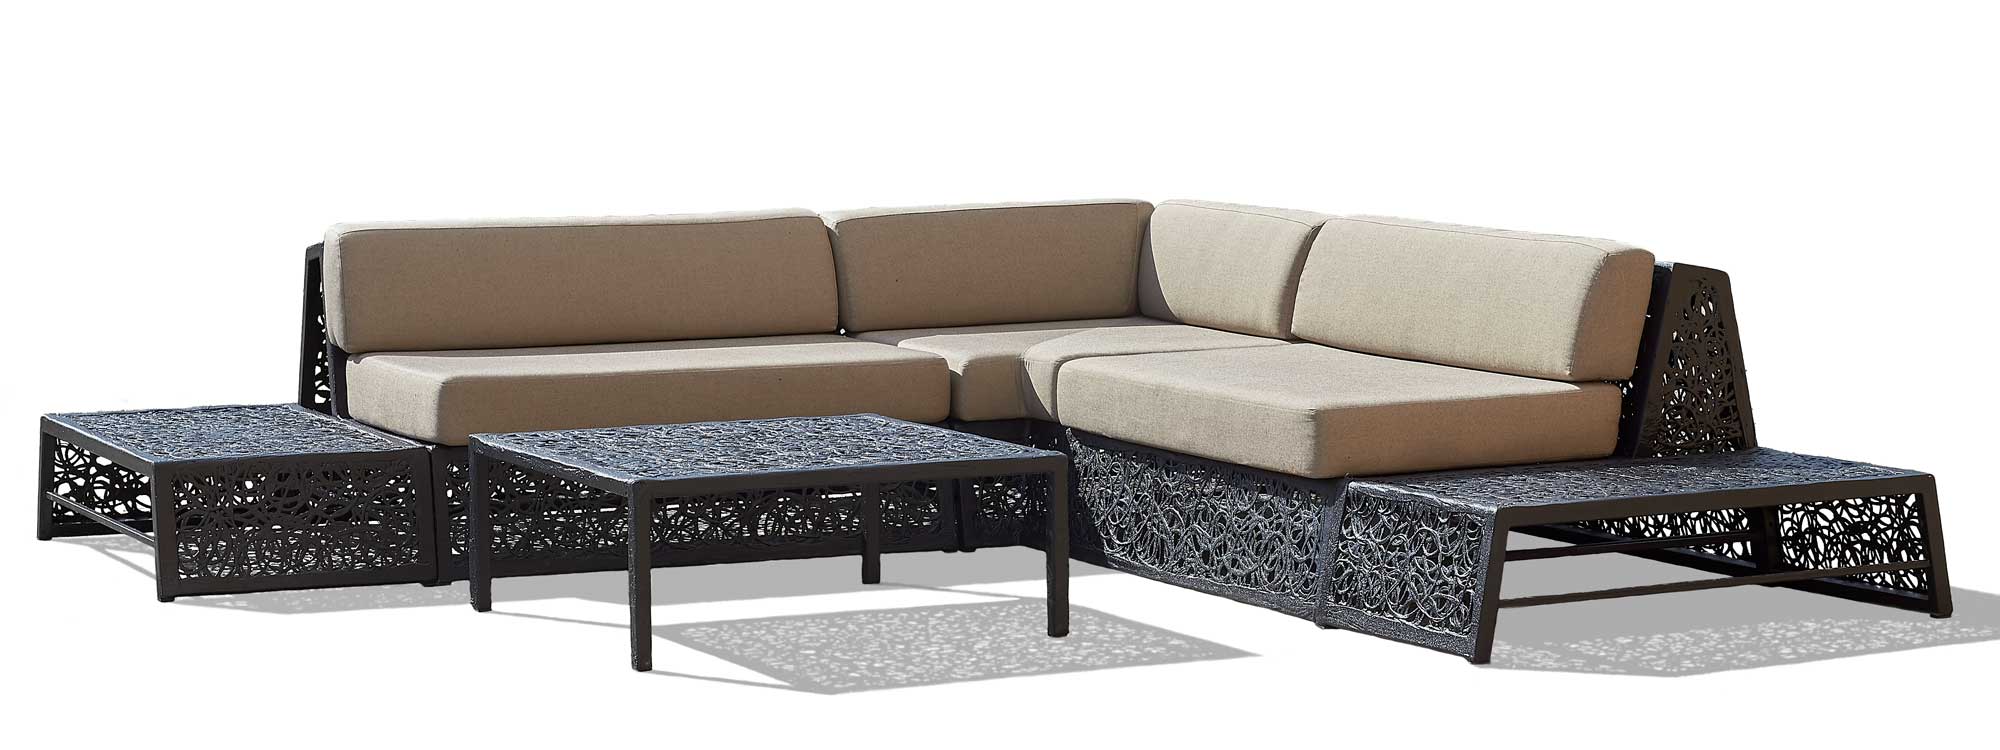 Studio image of Bios Lounge garden sofa and low table in black by Unknown Nordic